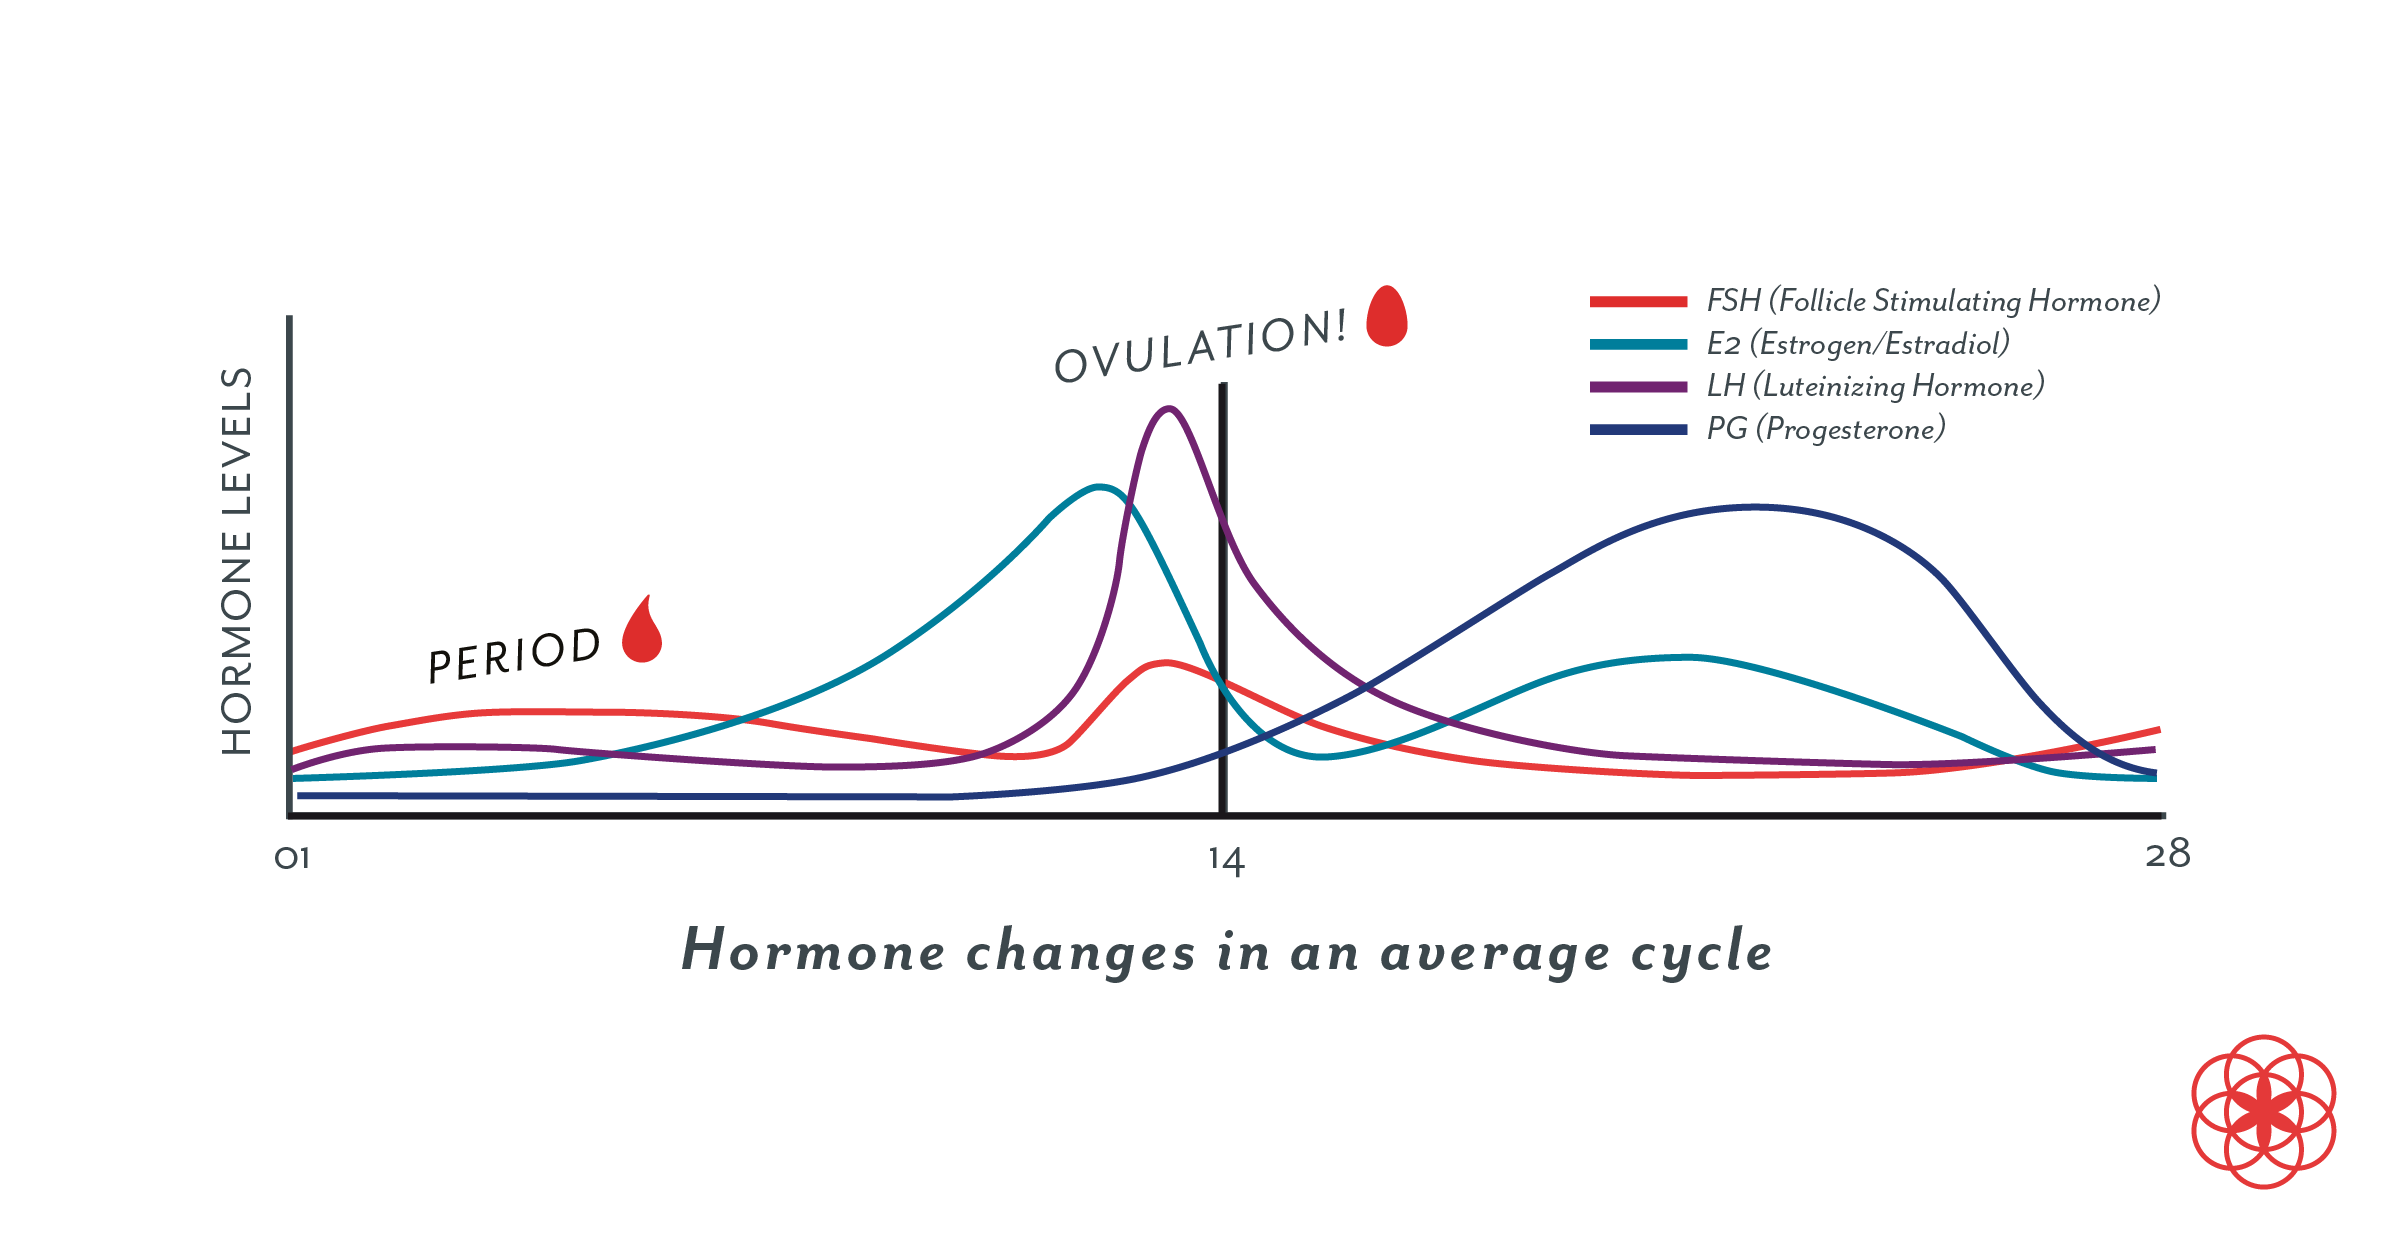 What do my hormones do throughout my cycle?